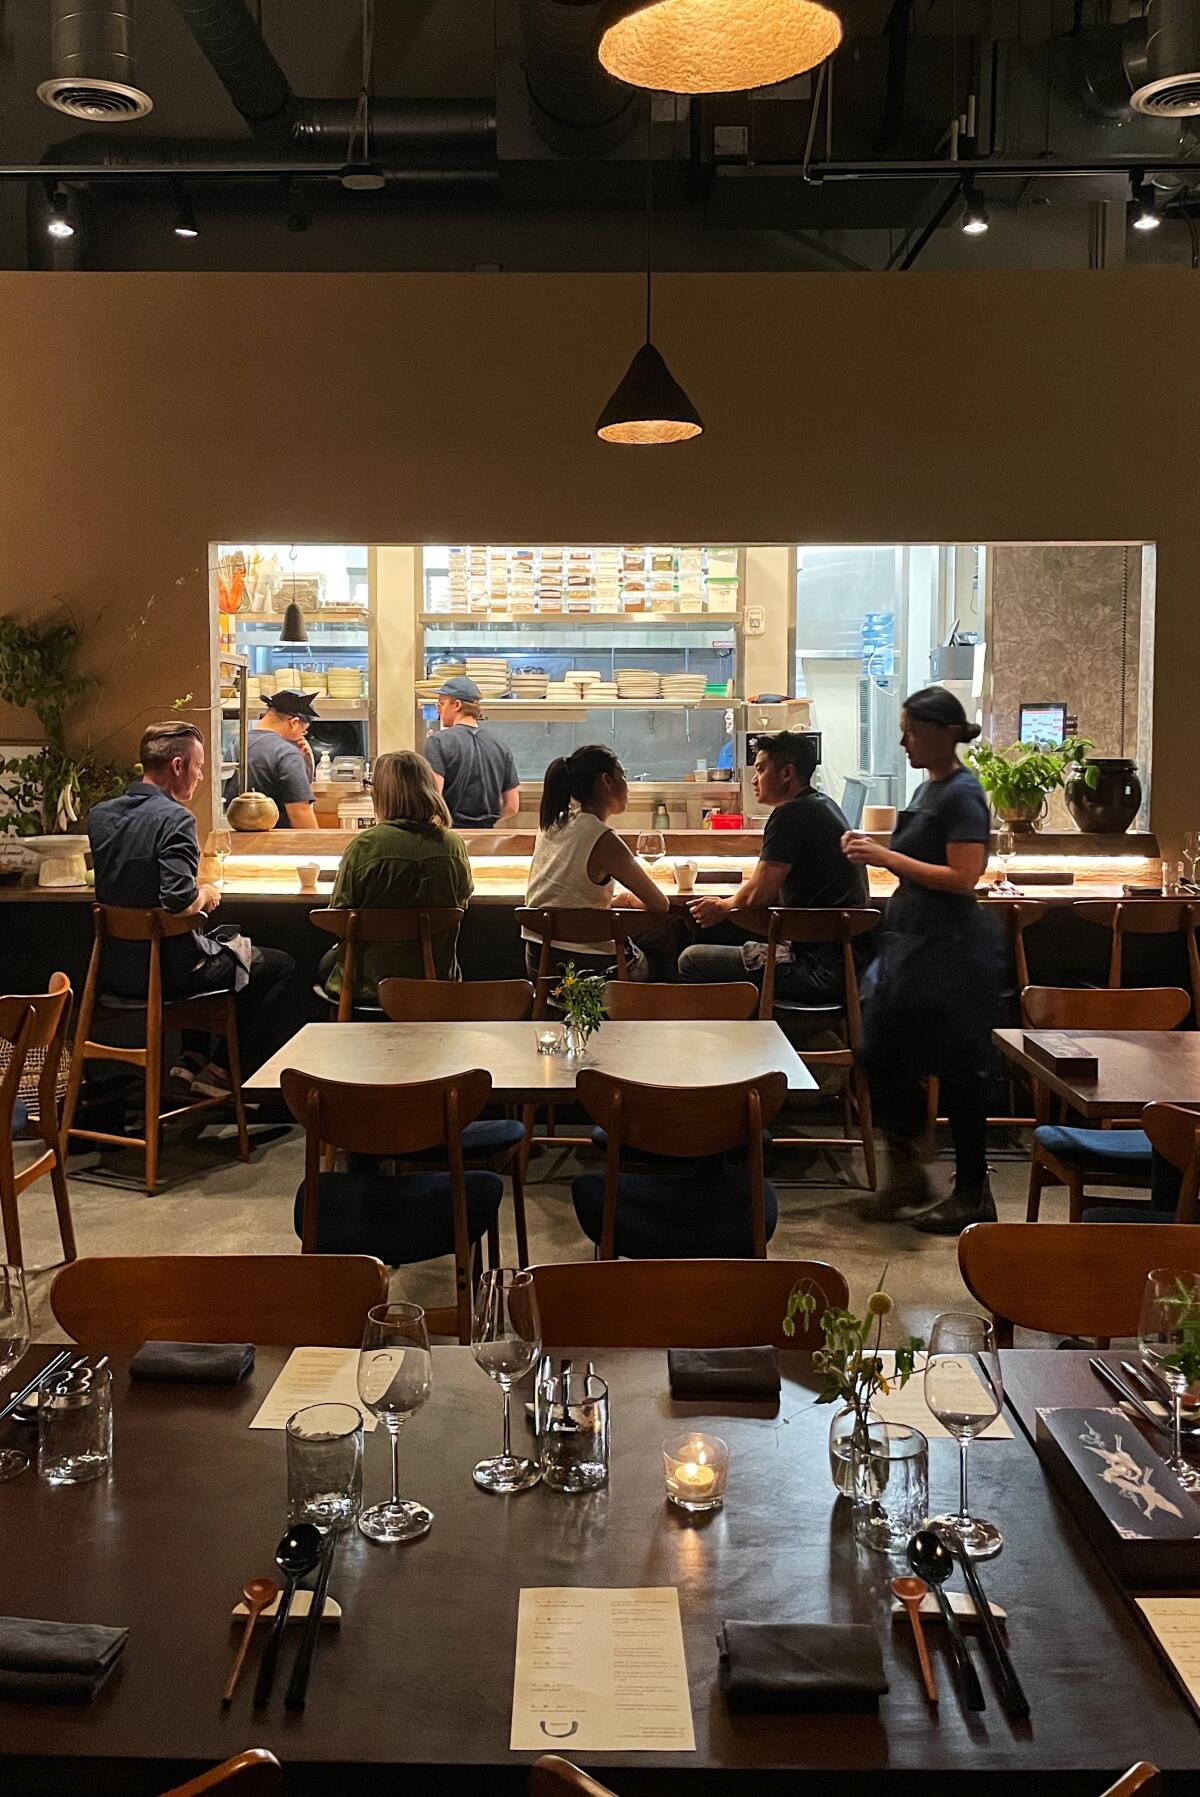 A vertical photo of guests seated at the chef's counter, kitchen visible beyond them.